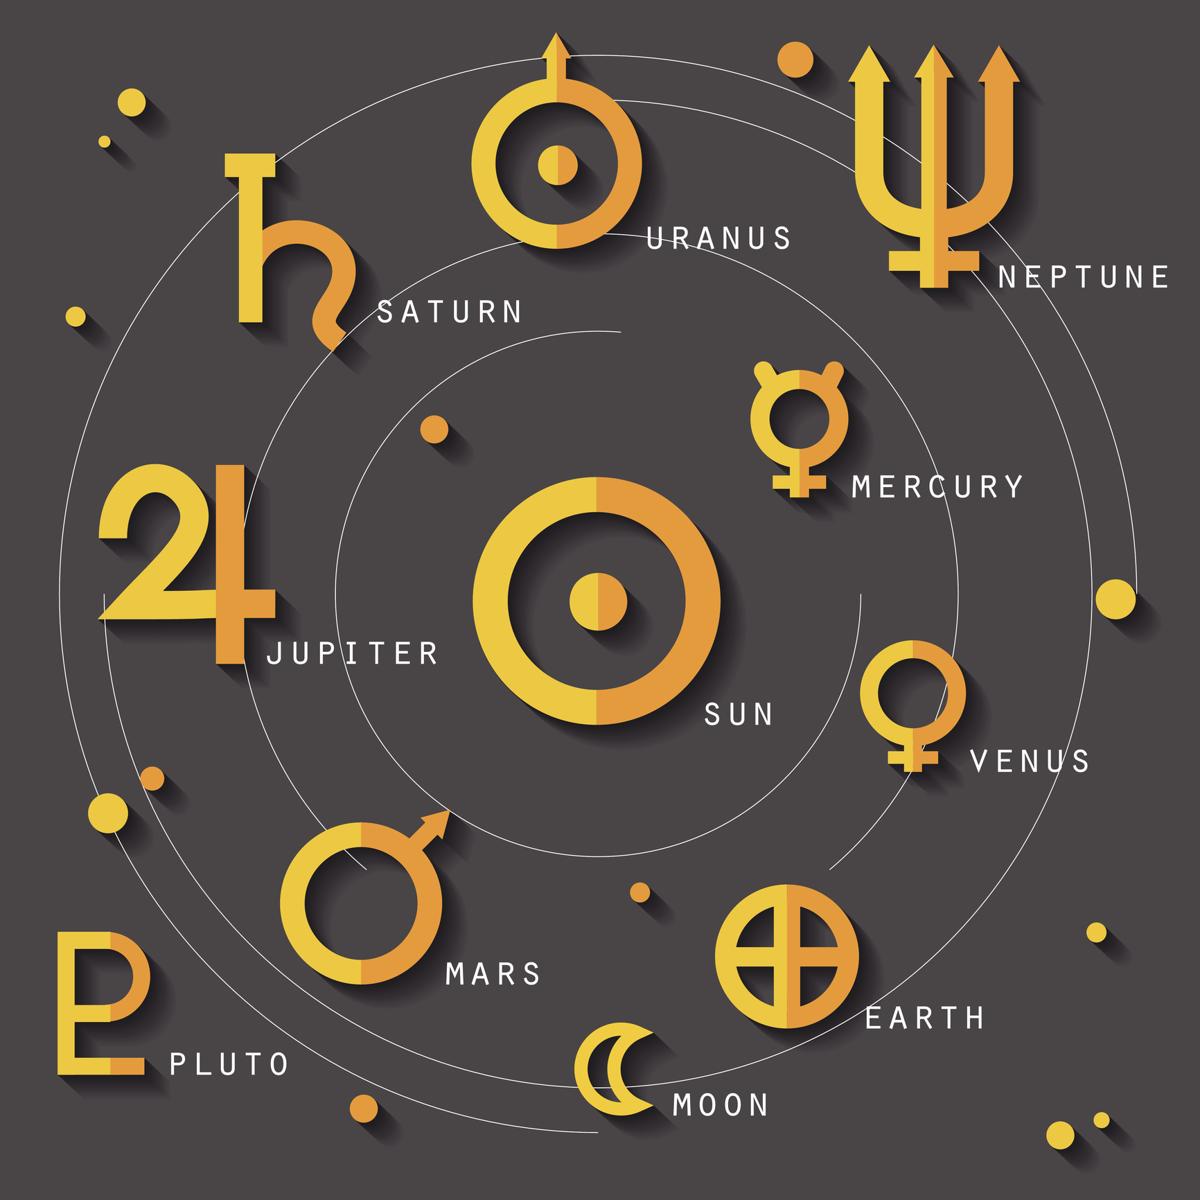 vedic astrology signs